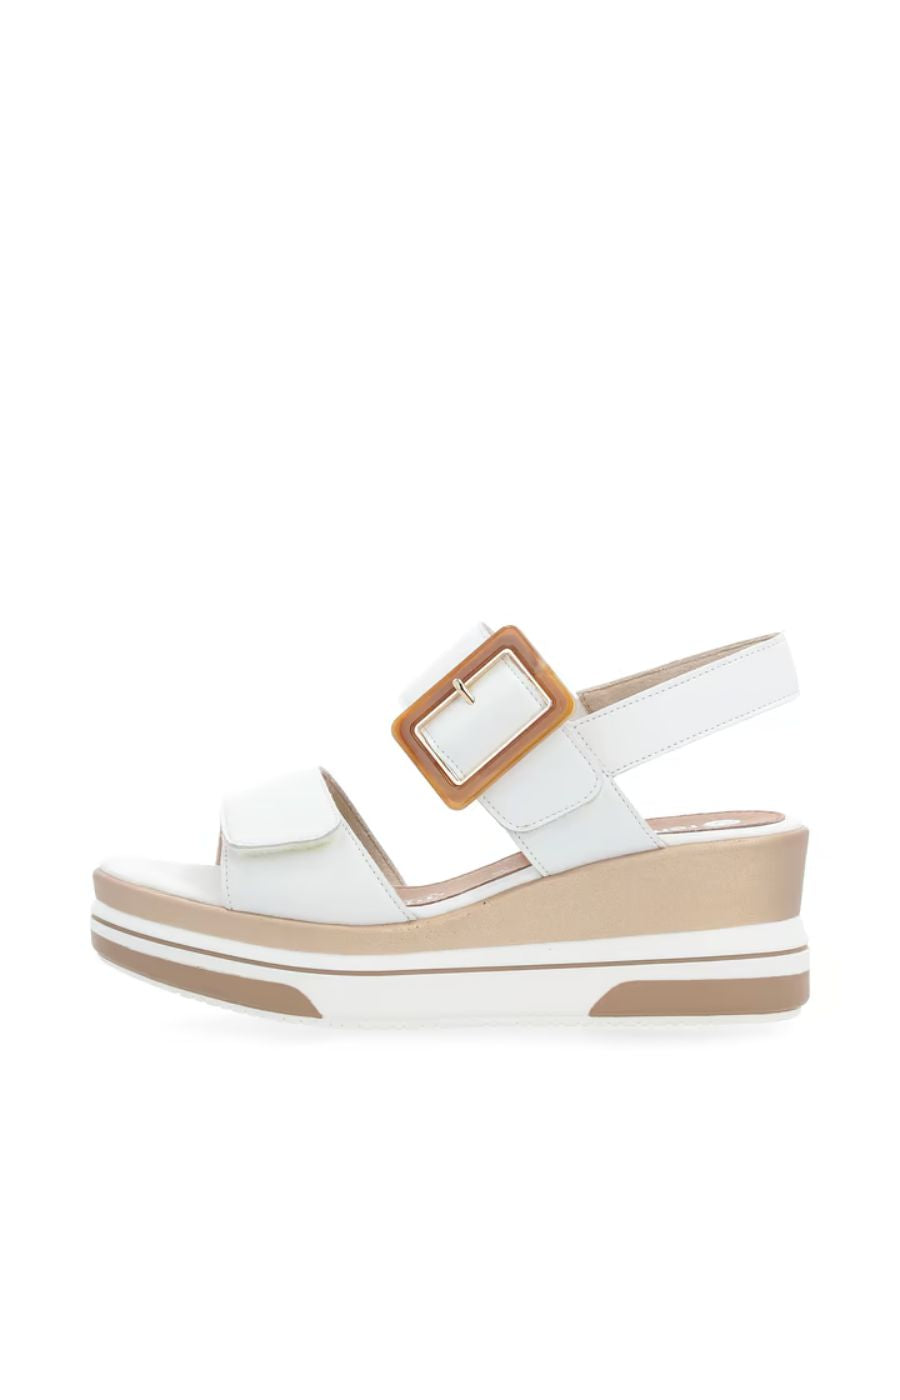 Remonte Wedge Sandal in White